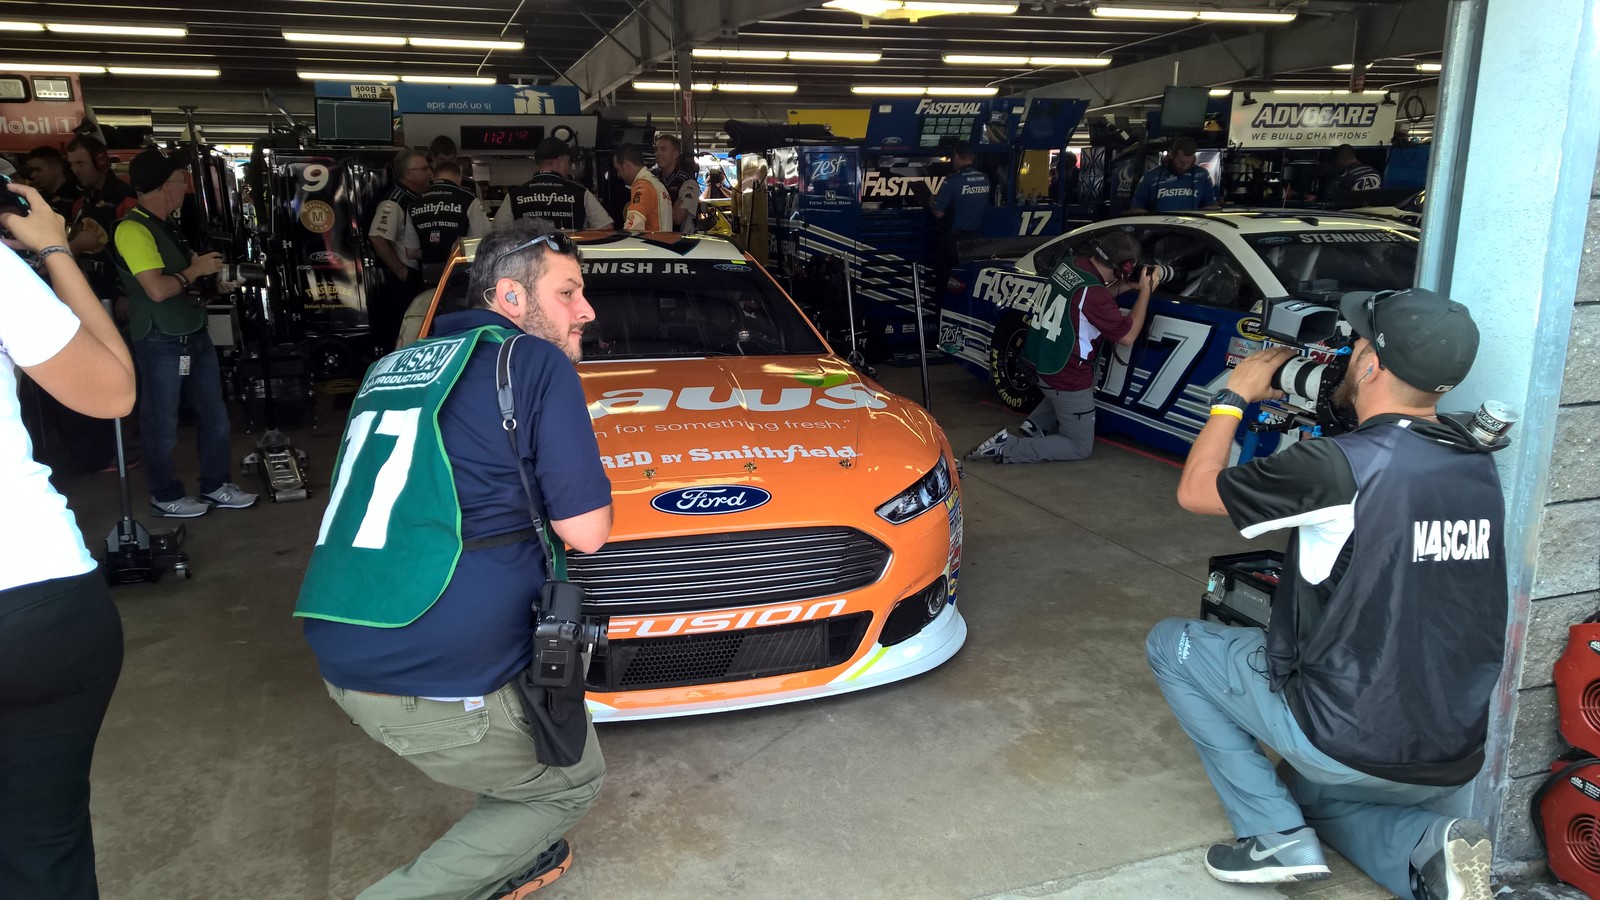 The #9 Shaw's Supermarkets Ford Fusion and NASCAR Sprint Cup Series driver Sam Hornish Jr. being filmed before a practice session from the garage at New Hampshire Motor Speedway. July 17th, 2015.